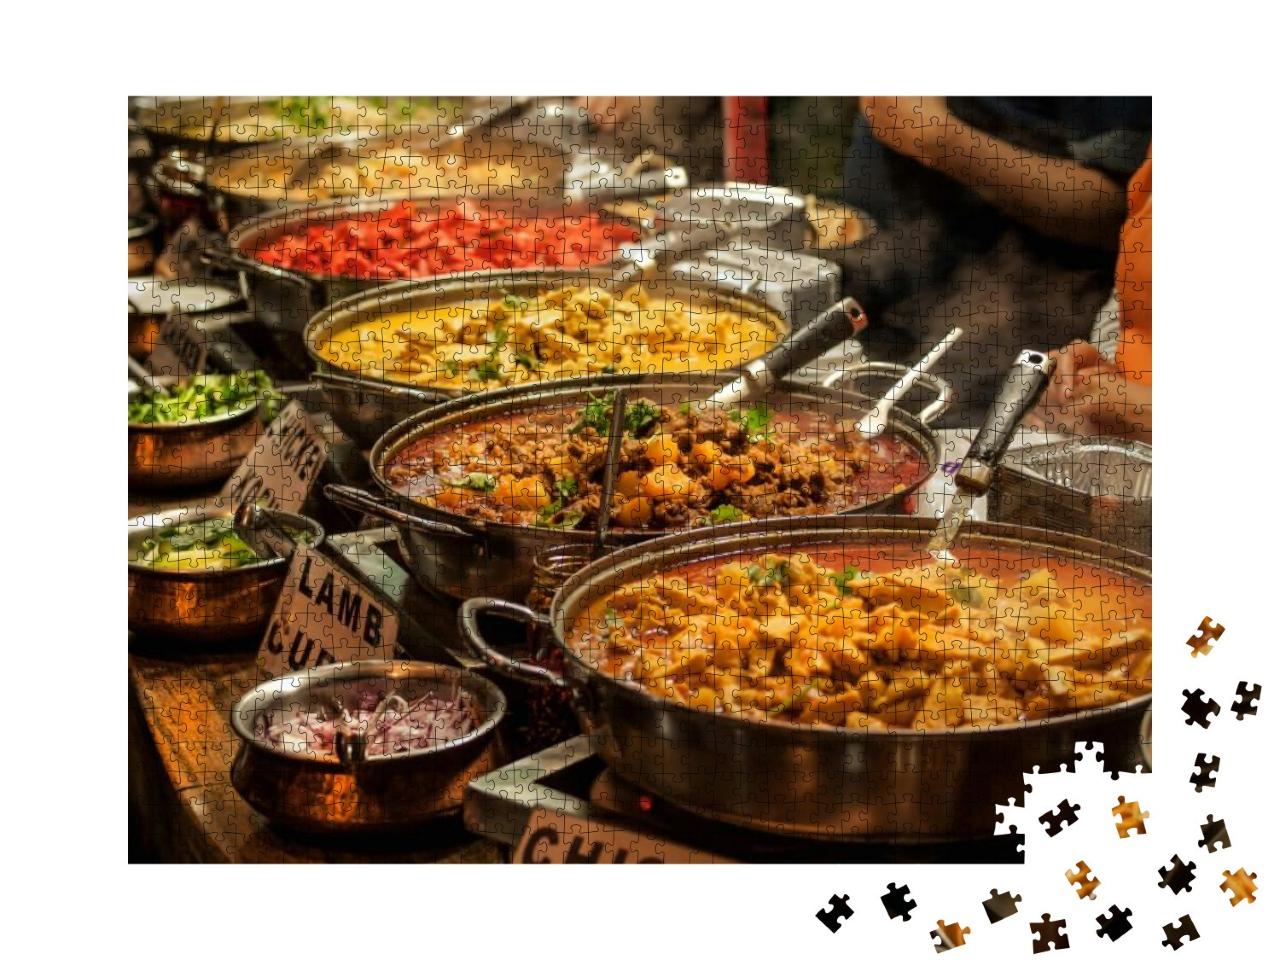 Oriental Food - Indian Takeaway At a London's Market... Jigsaw Puzzle with 1000 pieces